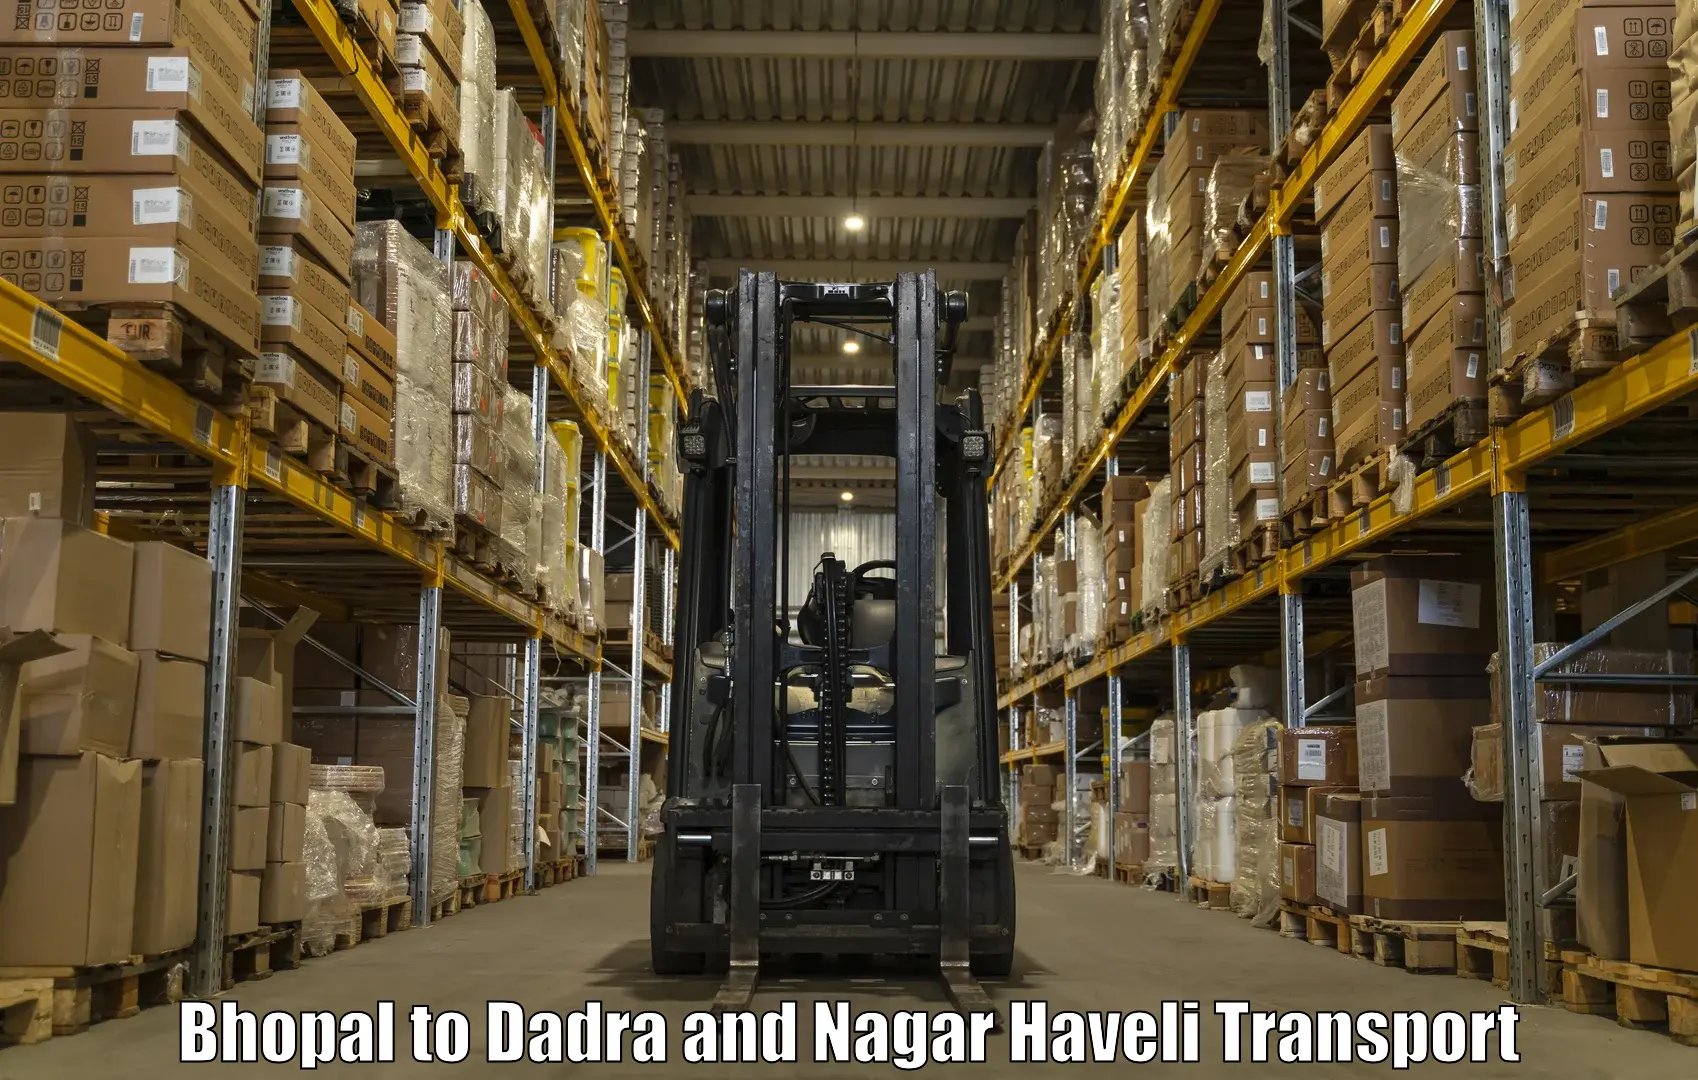 Transport shared services Bhopal to Dadra and Nagar Haveli